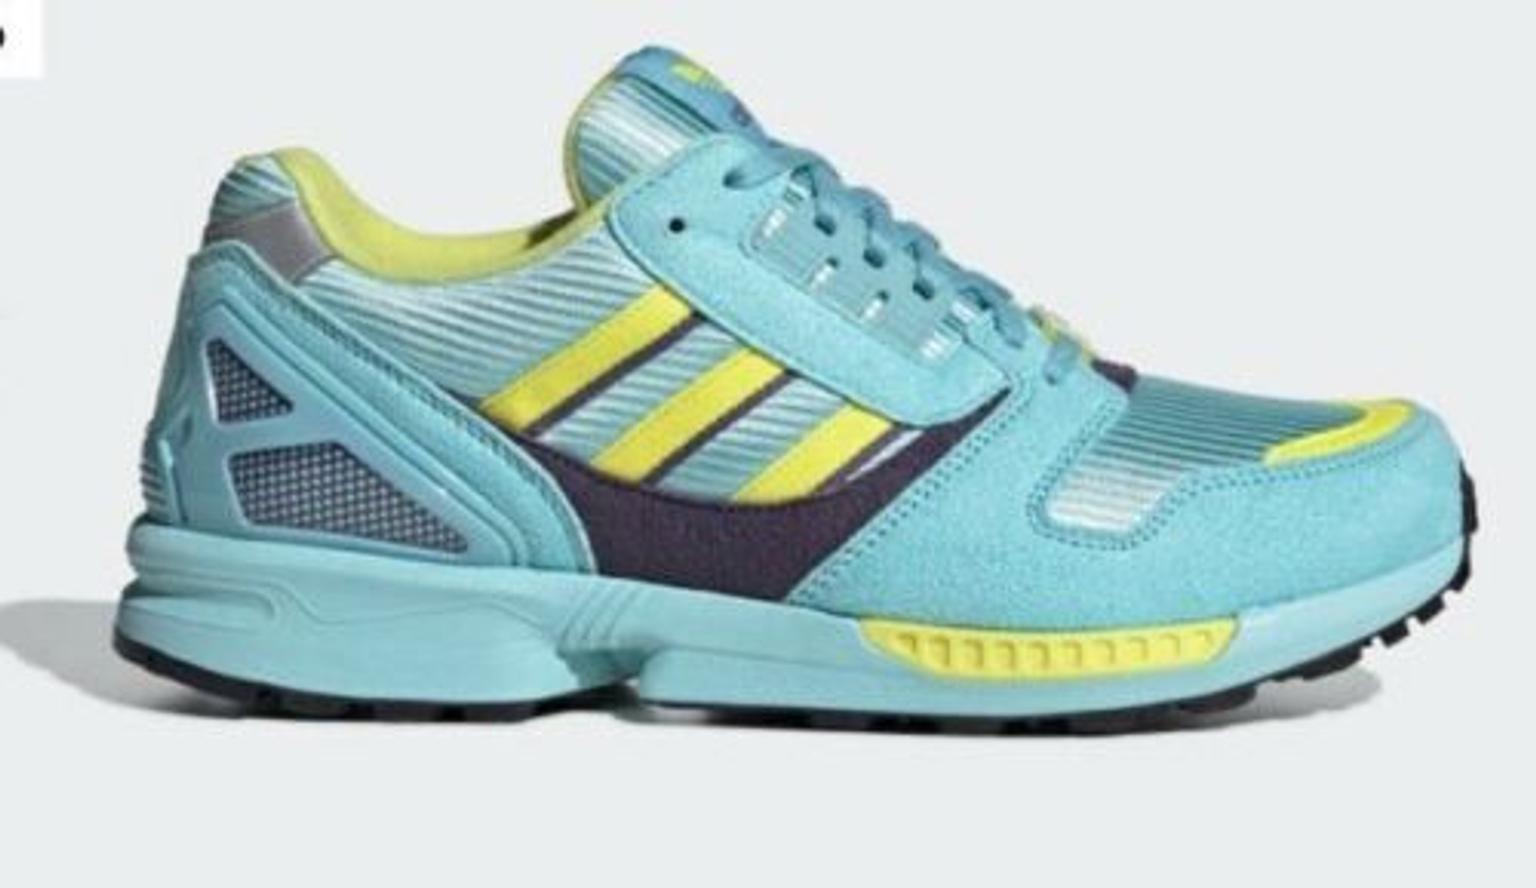 Adidas Originals zx 8000 - 9 uk-New with Box in UB3 Hillingdon for £120.00  for sale | Shpock